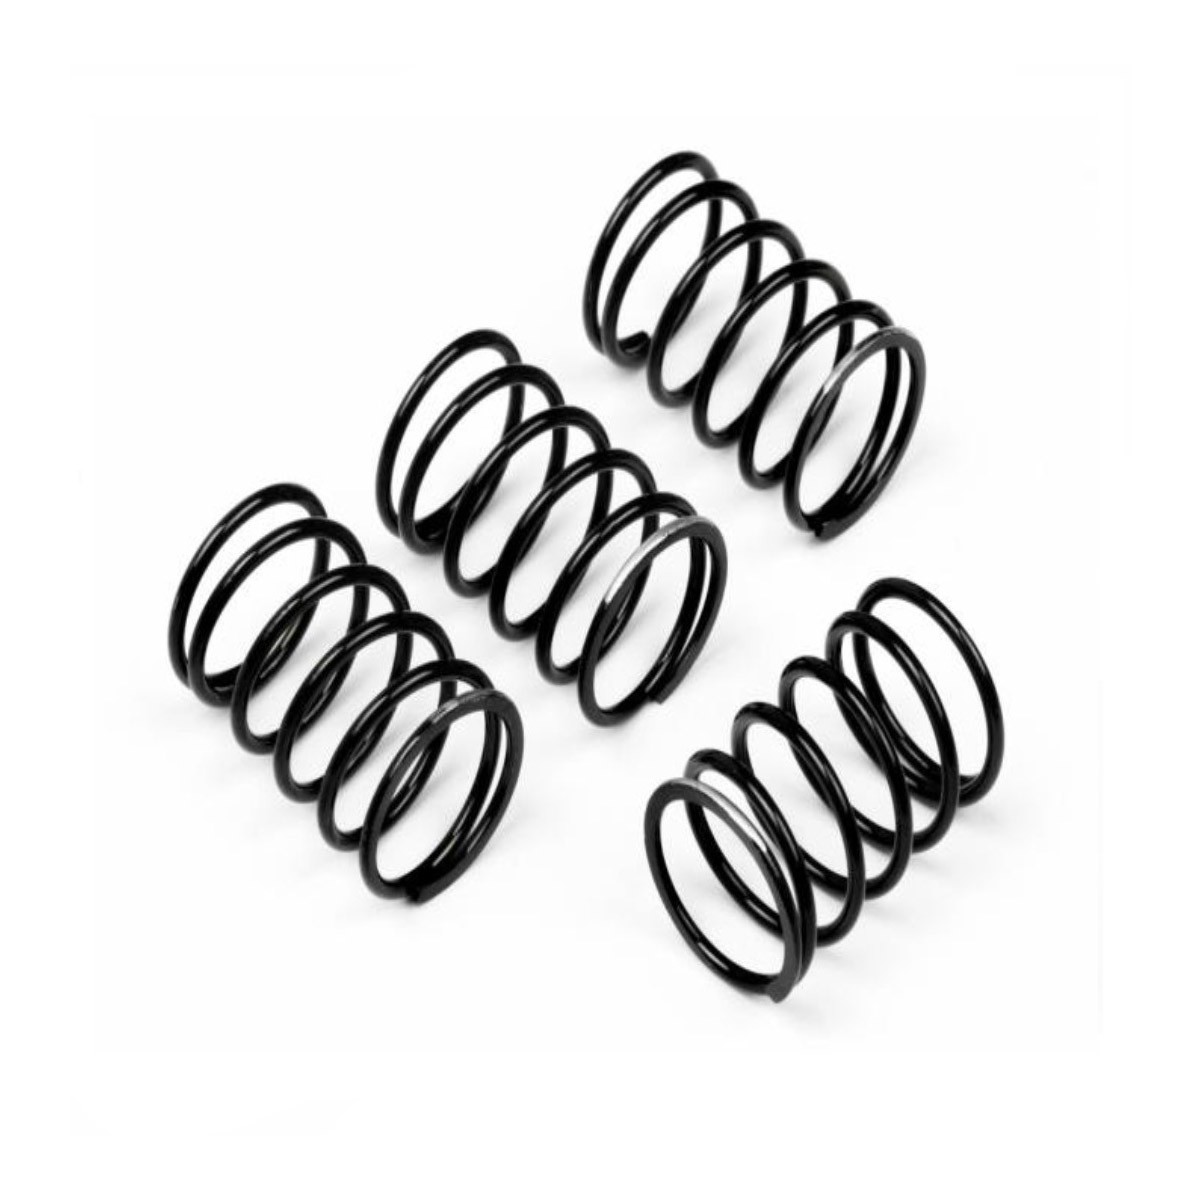  Replacement springs (factory height) for Αudi A1 1.4TFSI Kayaba (2010-2015) Image 1